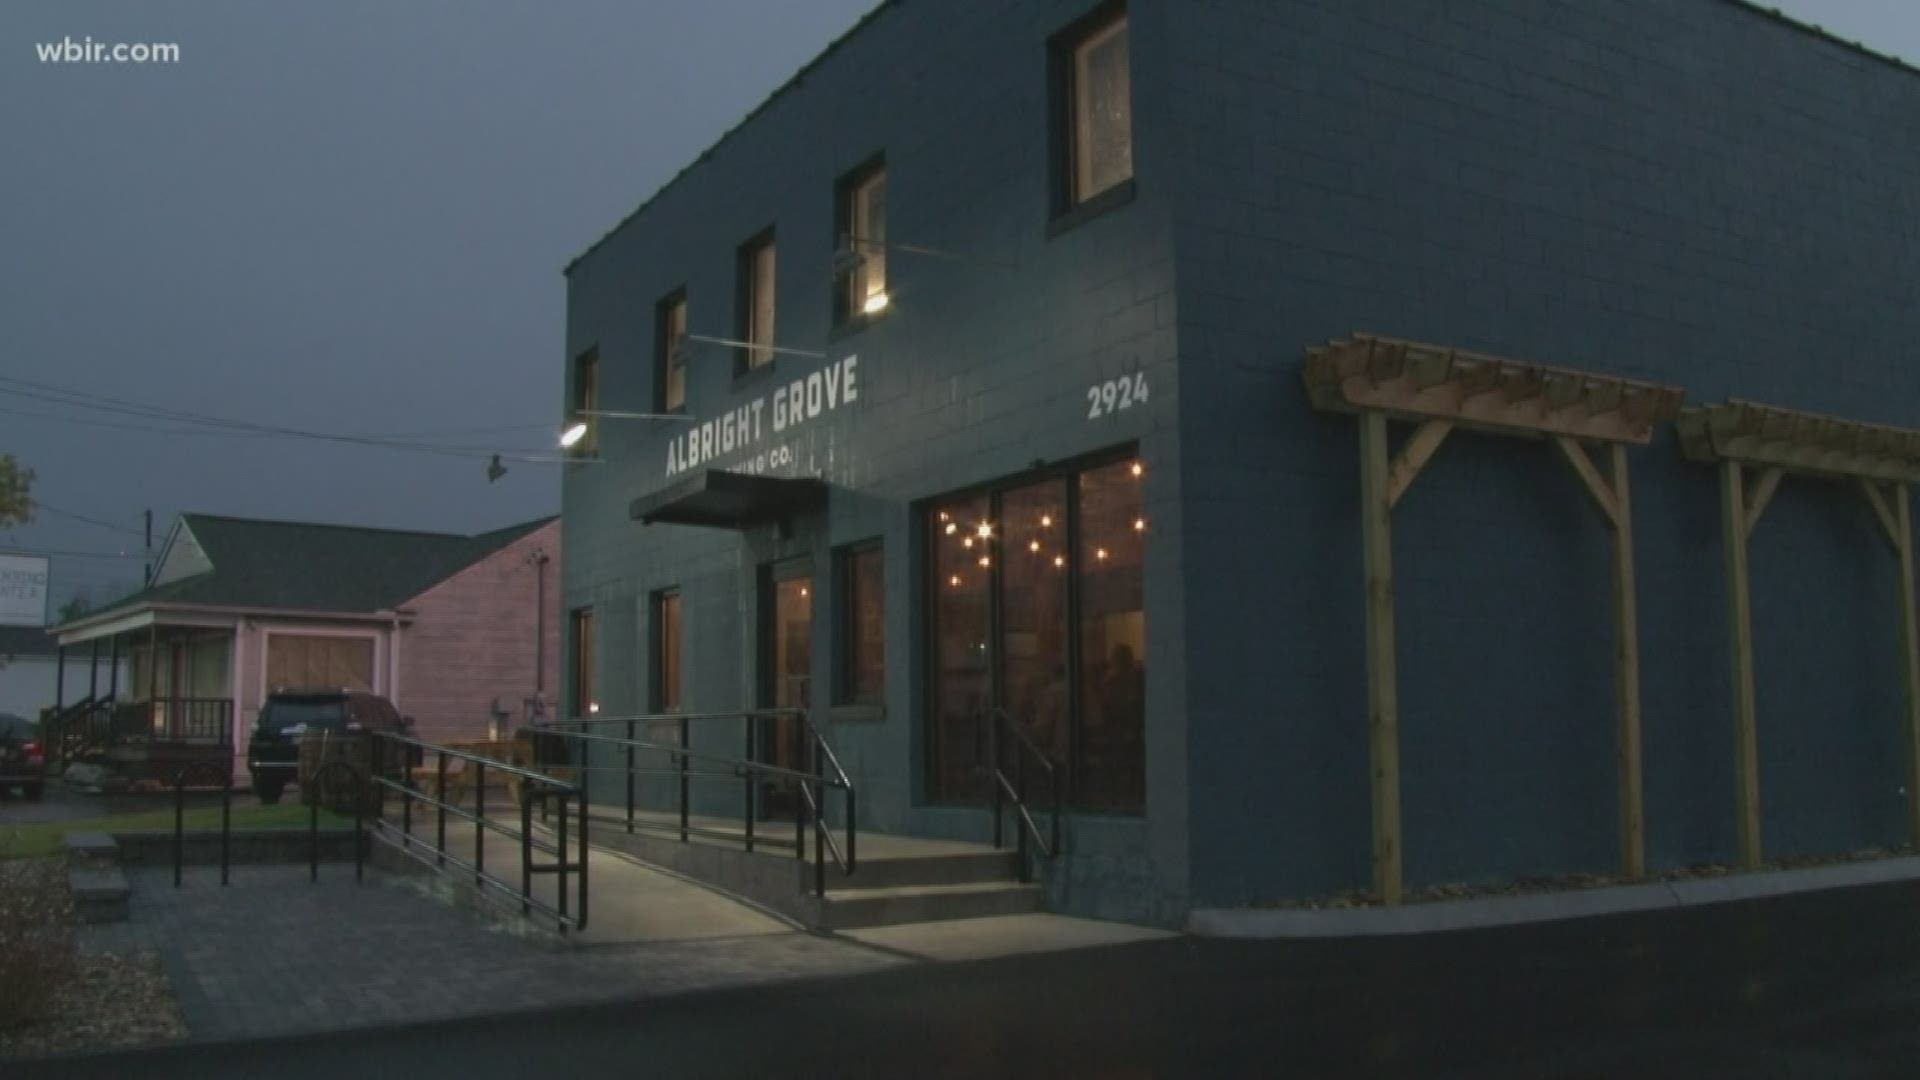 Albright Grove Brewing Company held its grand opening Thursday afternoon.